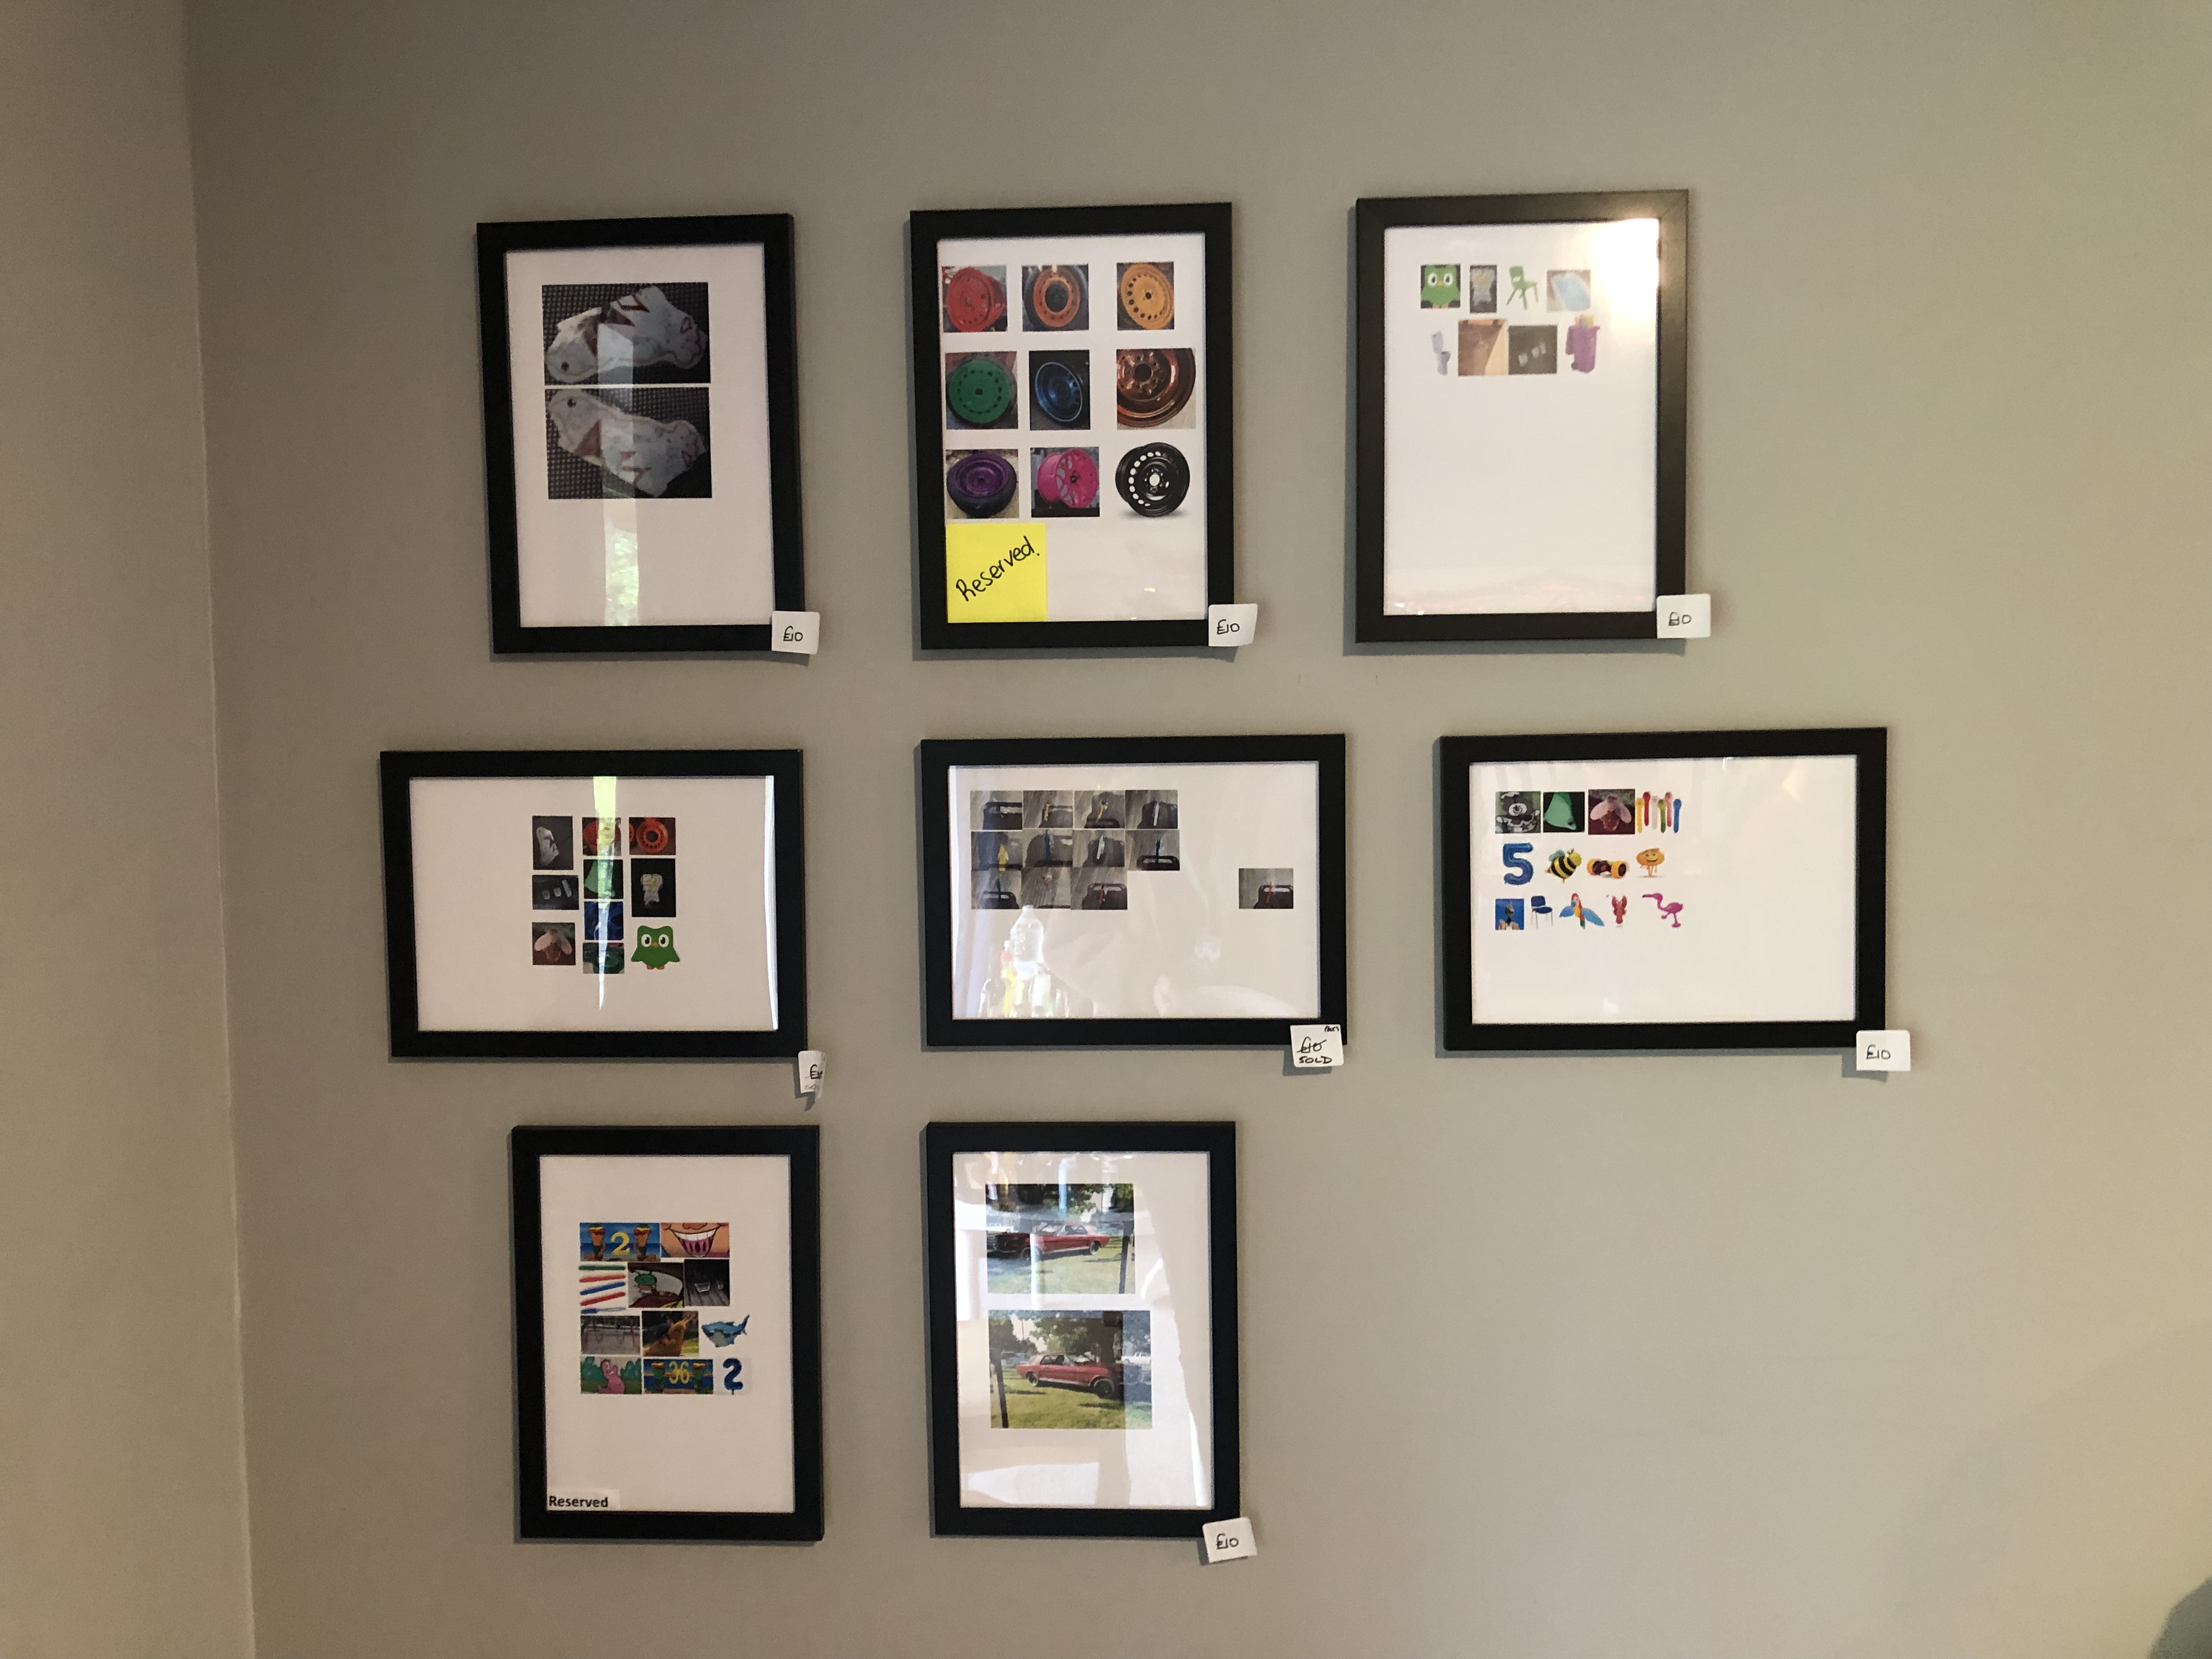 A display of the young person's collection of collages on the wall